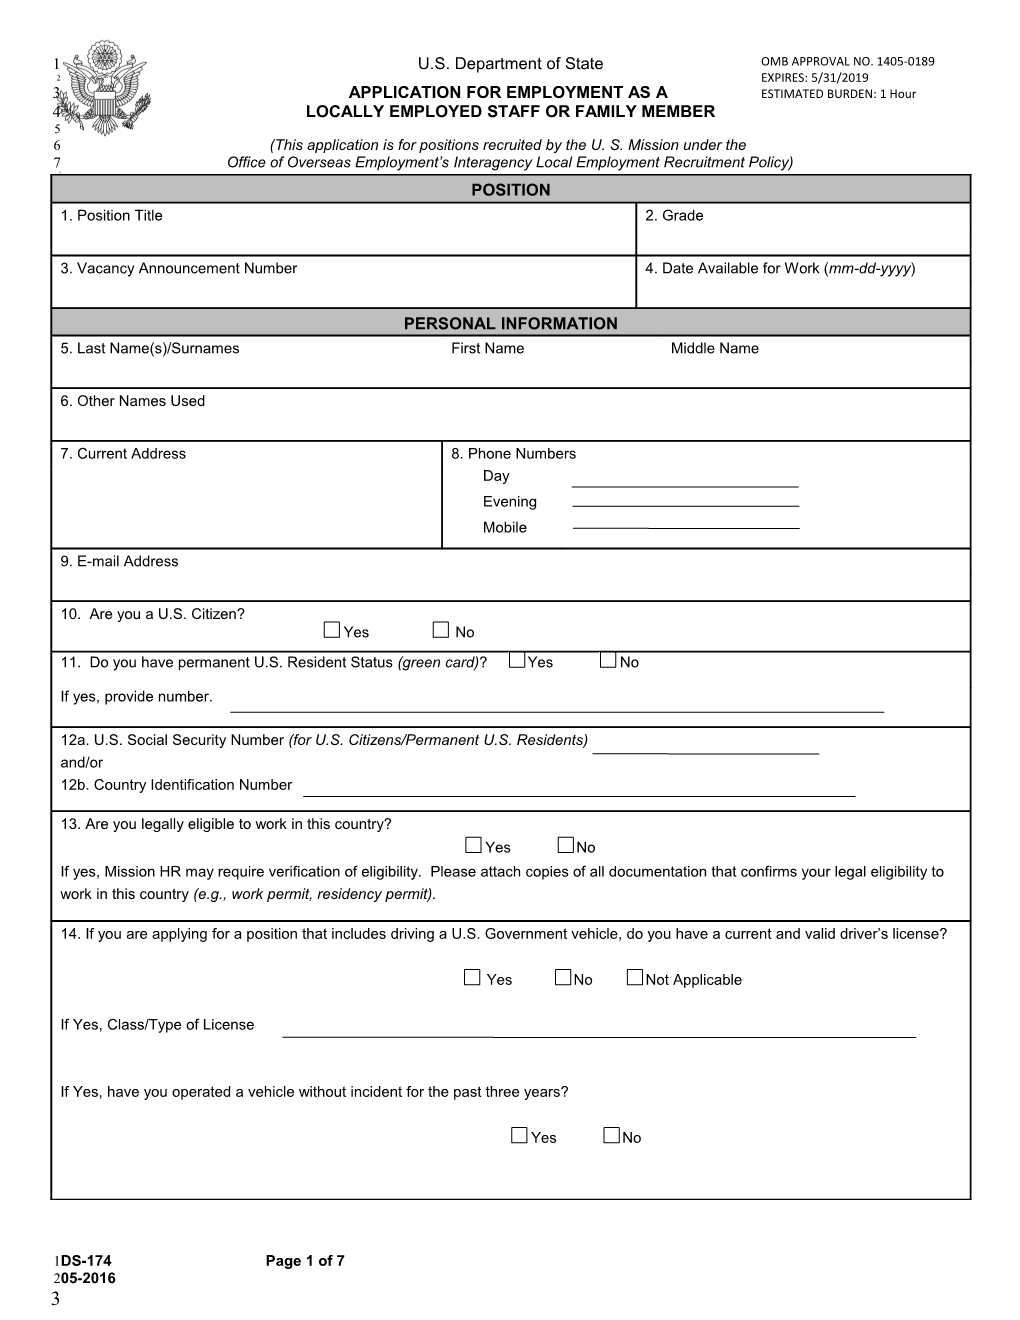 DS-174 Application Form